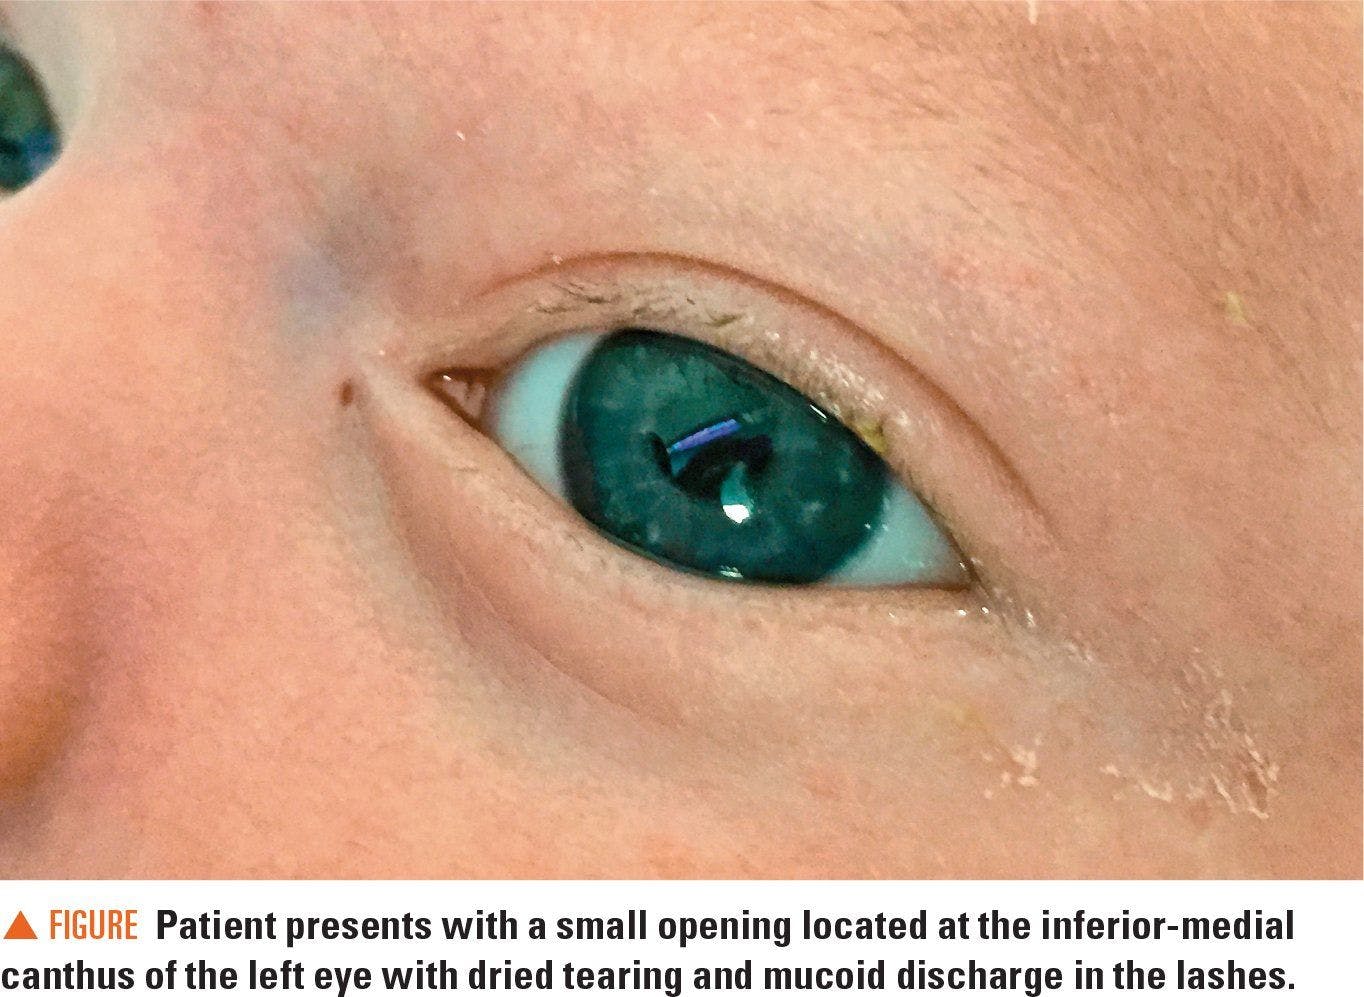 Image of patient in this case